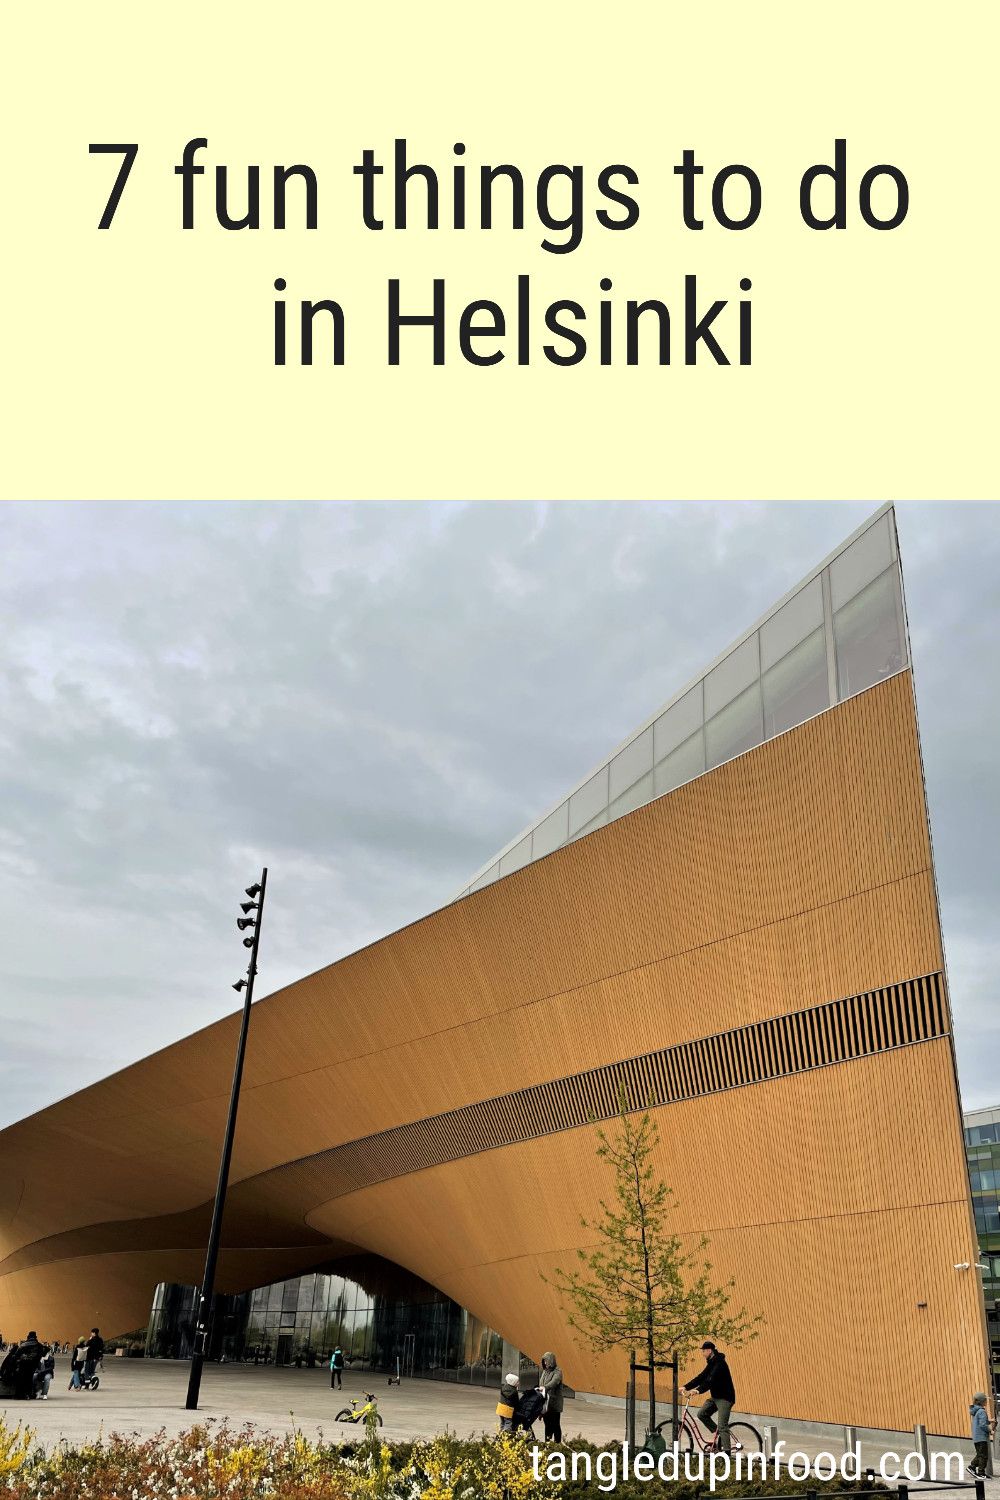 Photo of Helsinki Central Library and text reading "7 fun things to do in Helsinki"